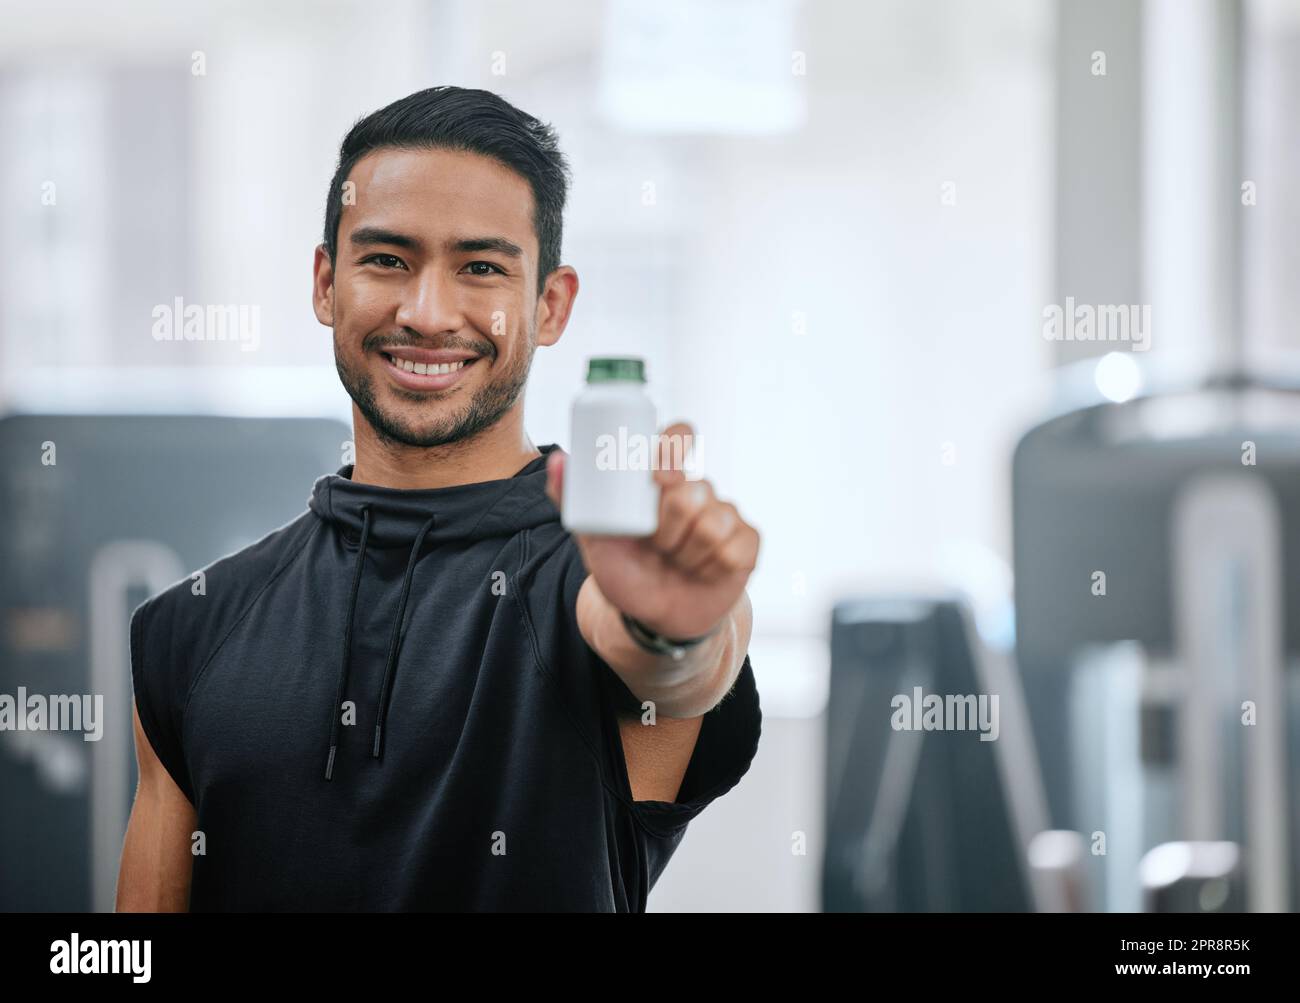 Portrait of smiling trainer alone in gym, holding and showing bottle of steroid pills. Asian coach with hormone enhancing drugs for workout in exercise health club. Bodybuilder man in fitness centre Stock Photo